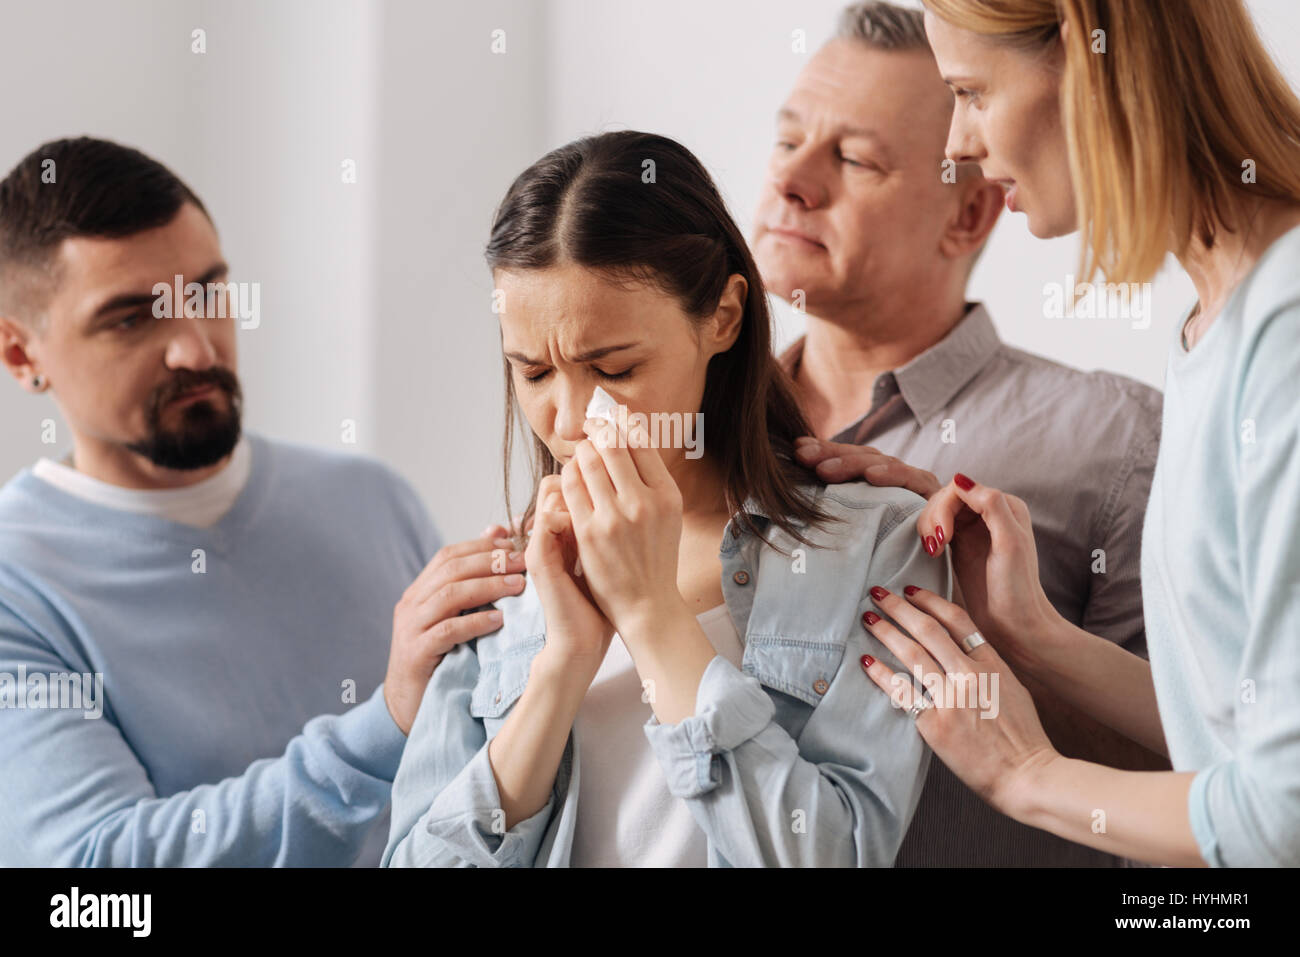 Three coworkers feeling pity for their colleague Stock Photo